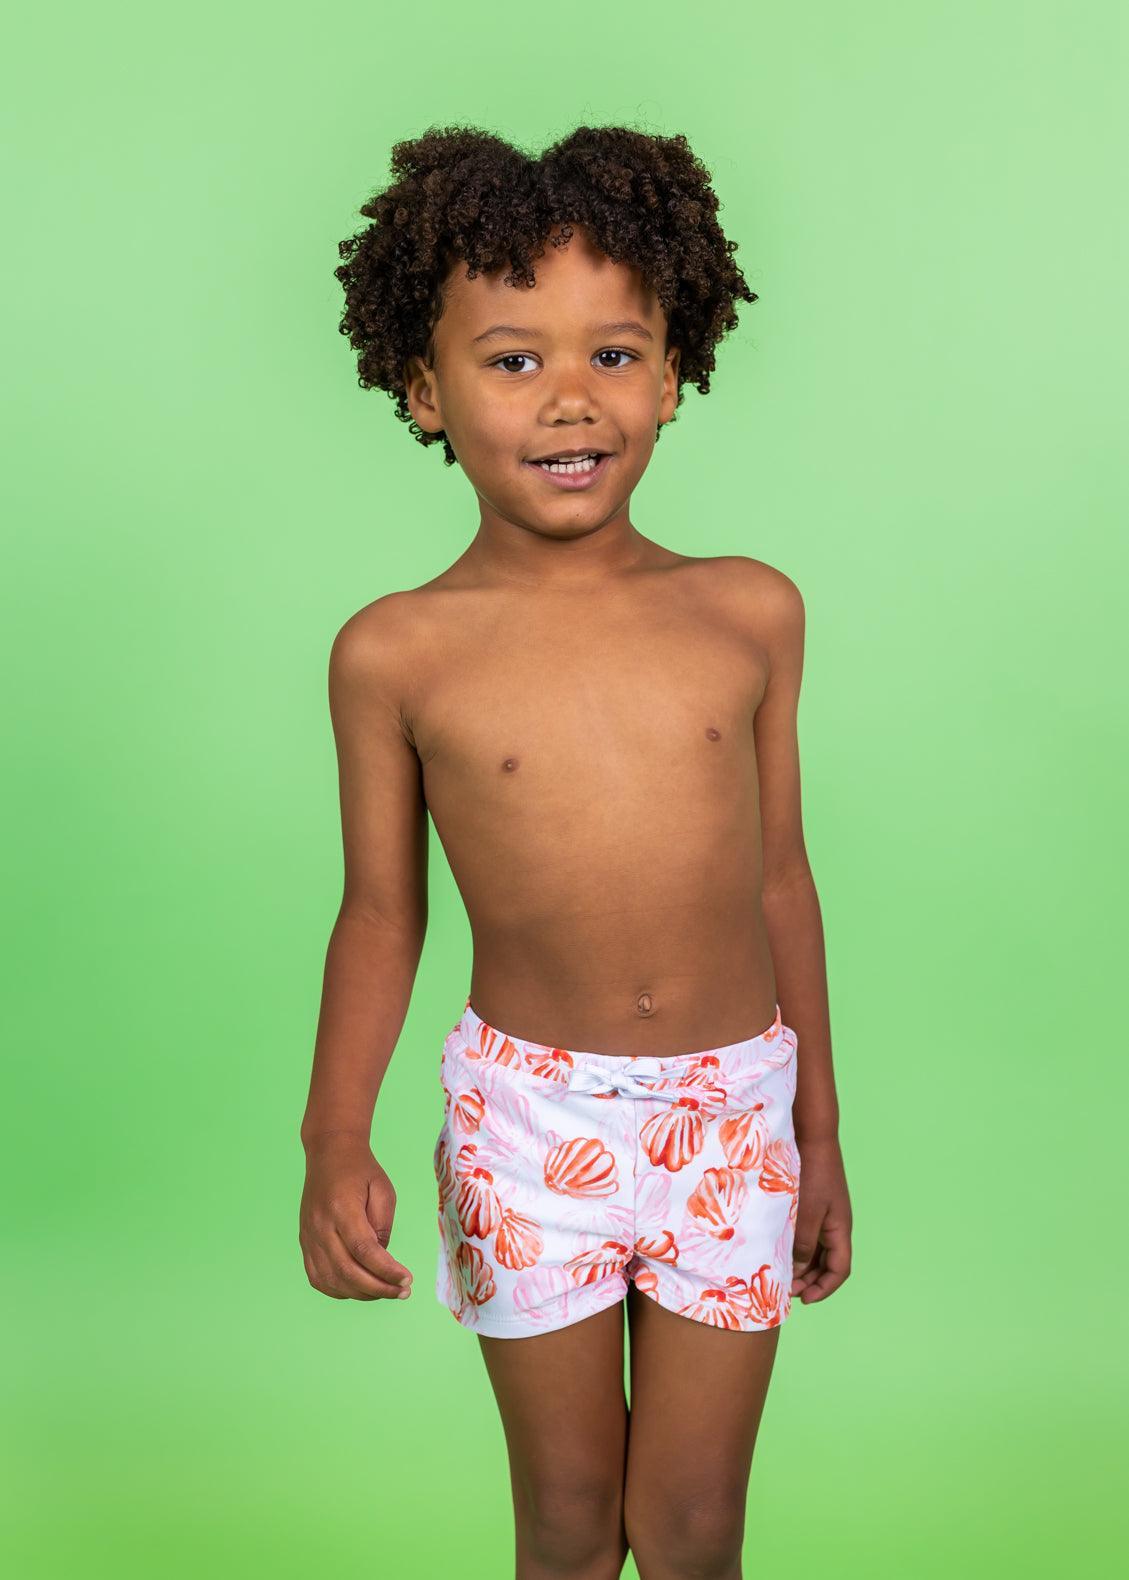 Boys Swimsuit - Shorts - Painted Clams